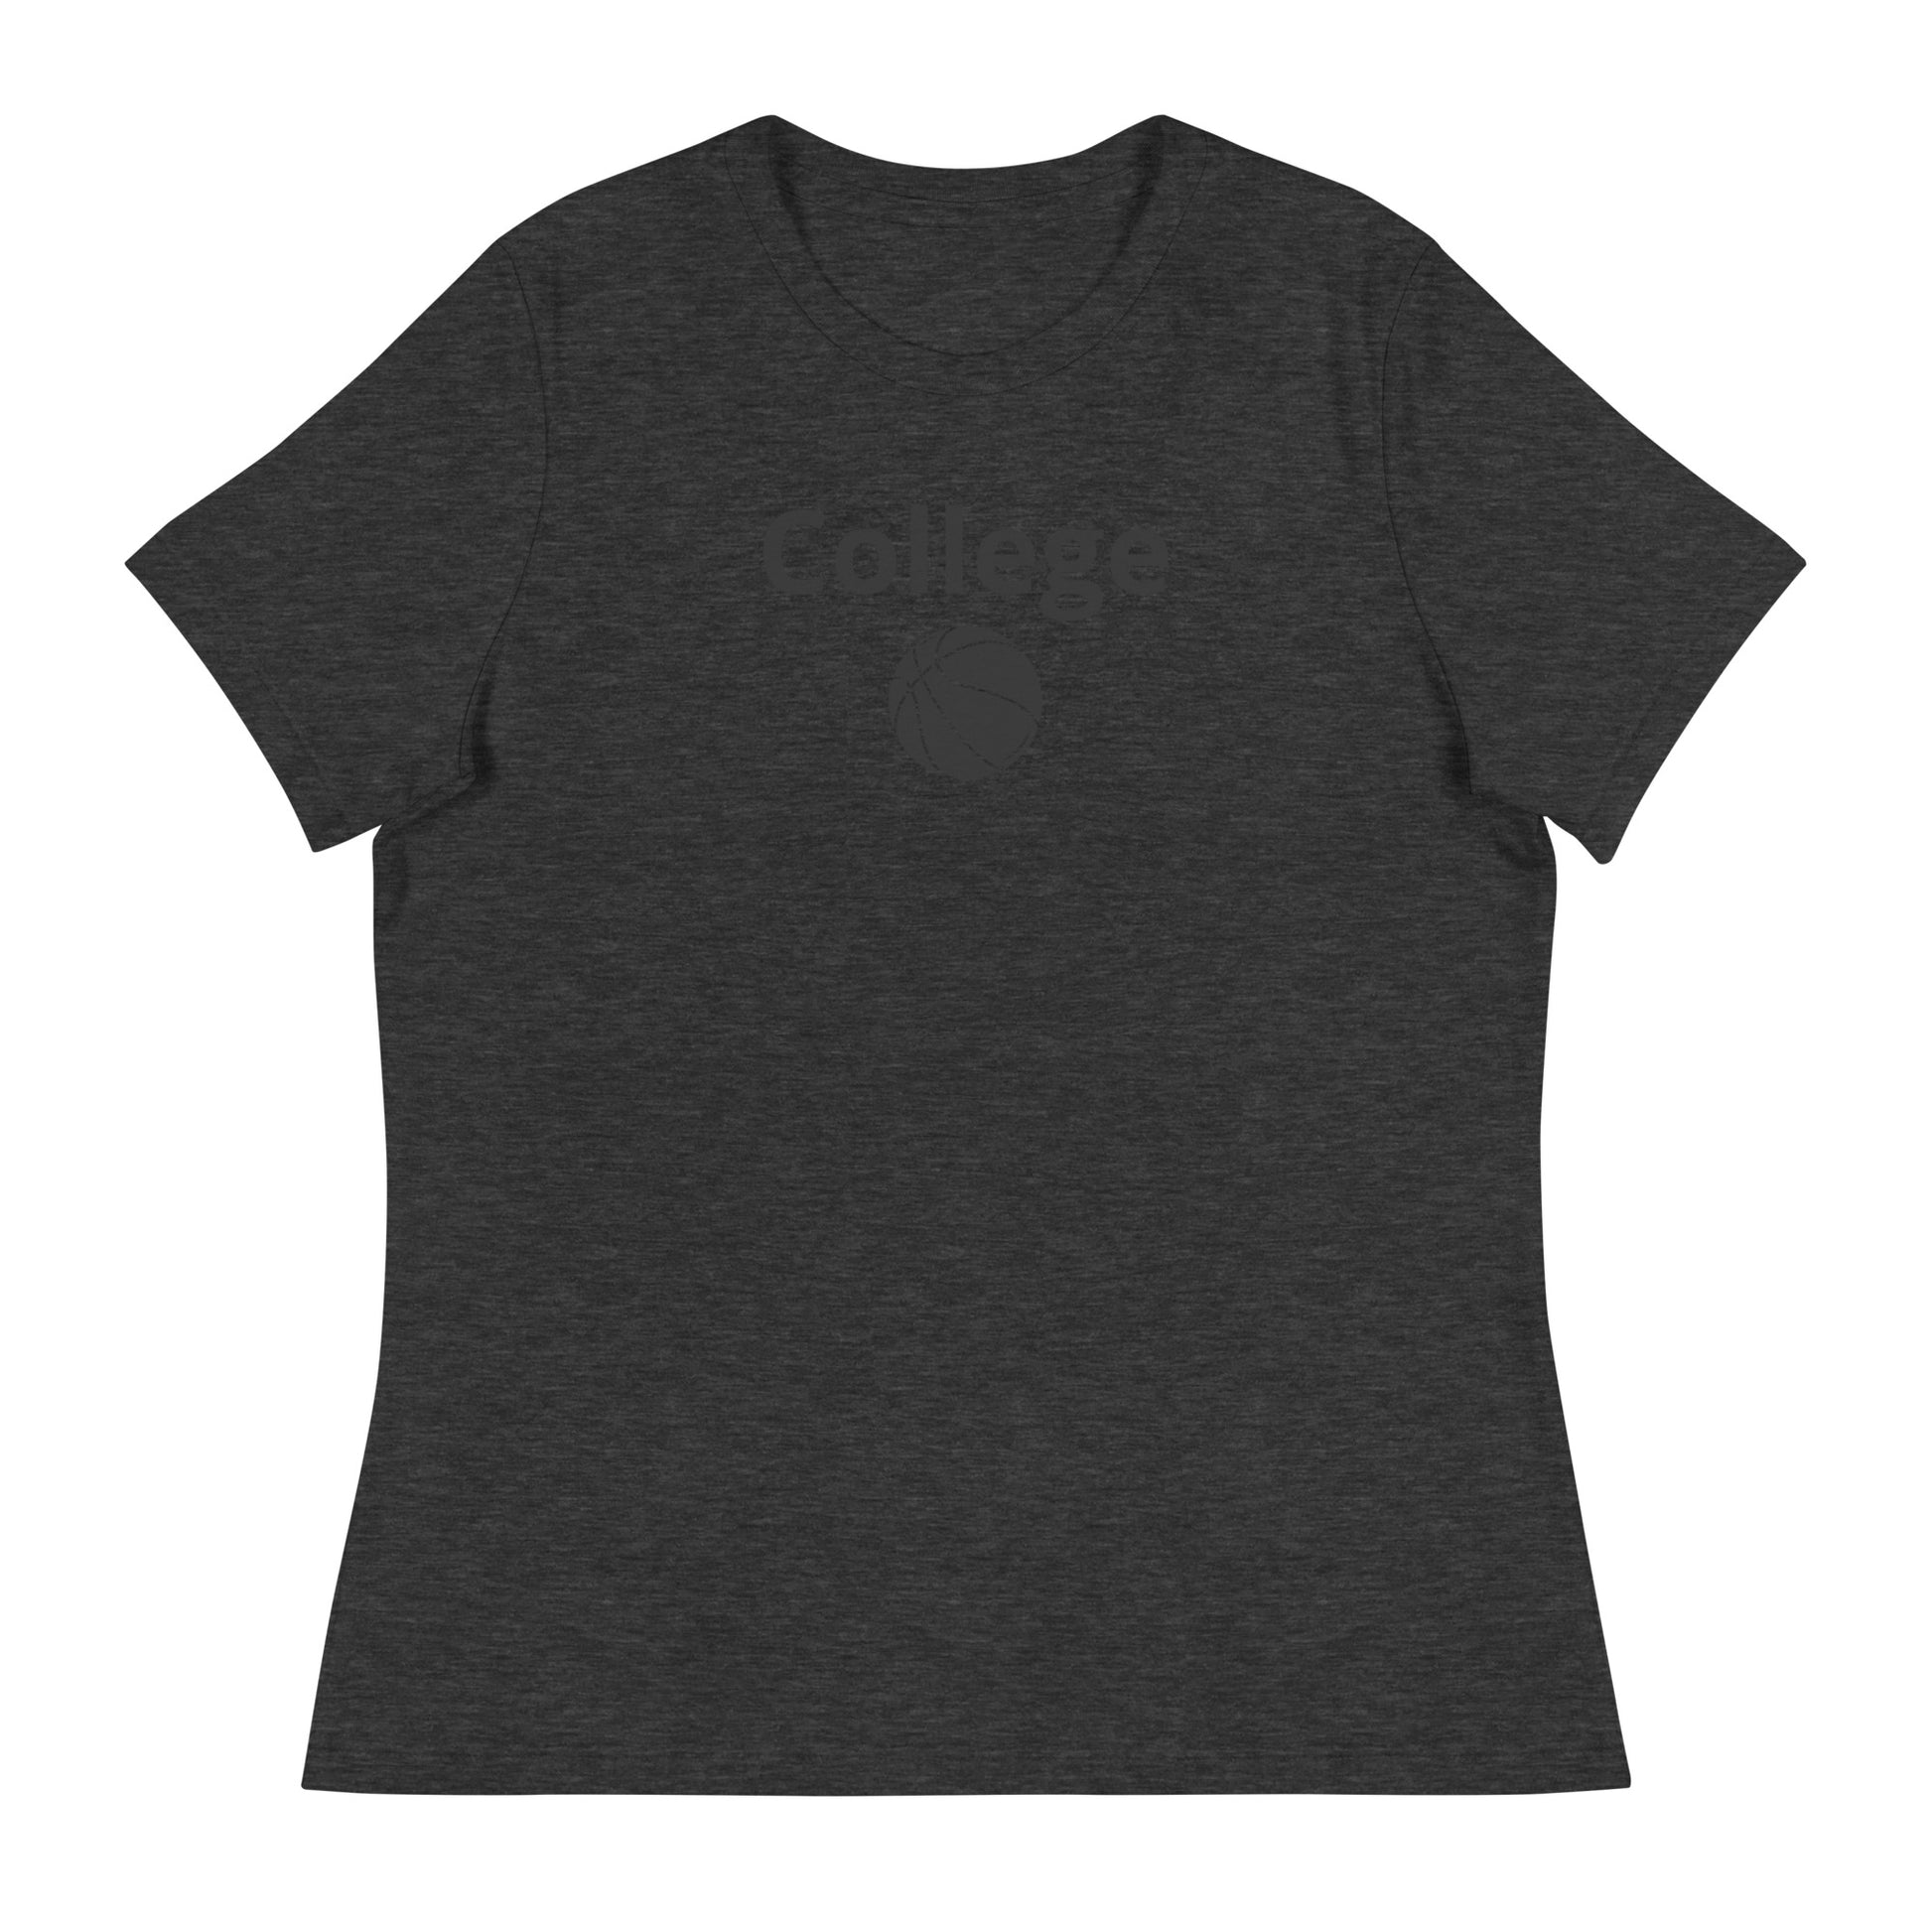 Women's college basketball graphic tee shirt in grey